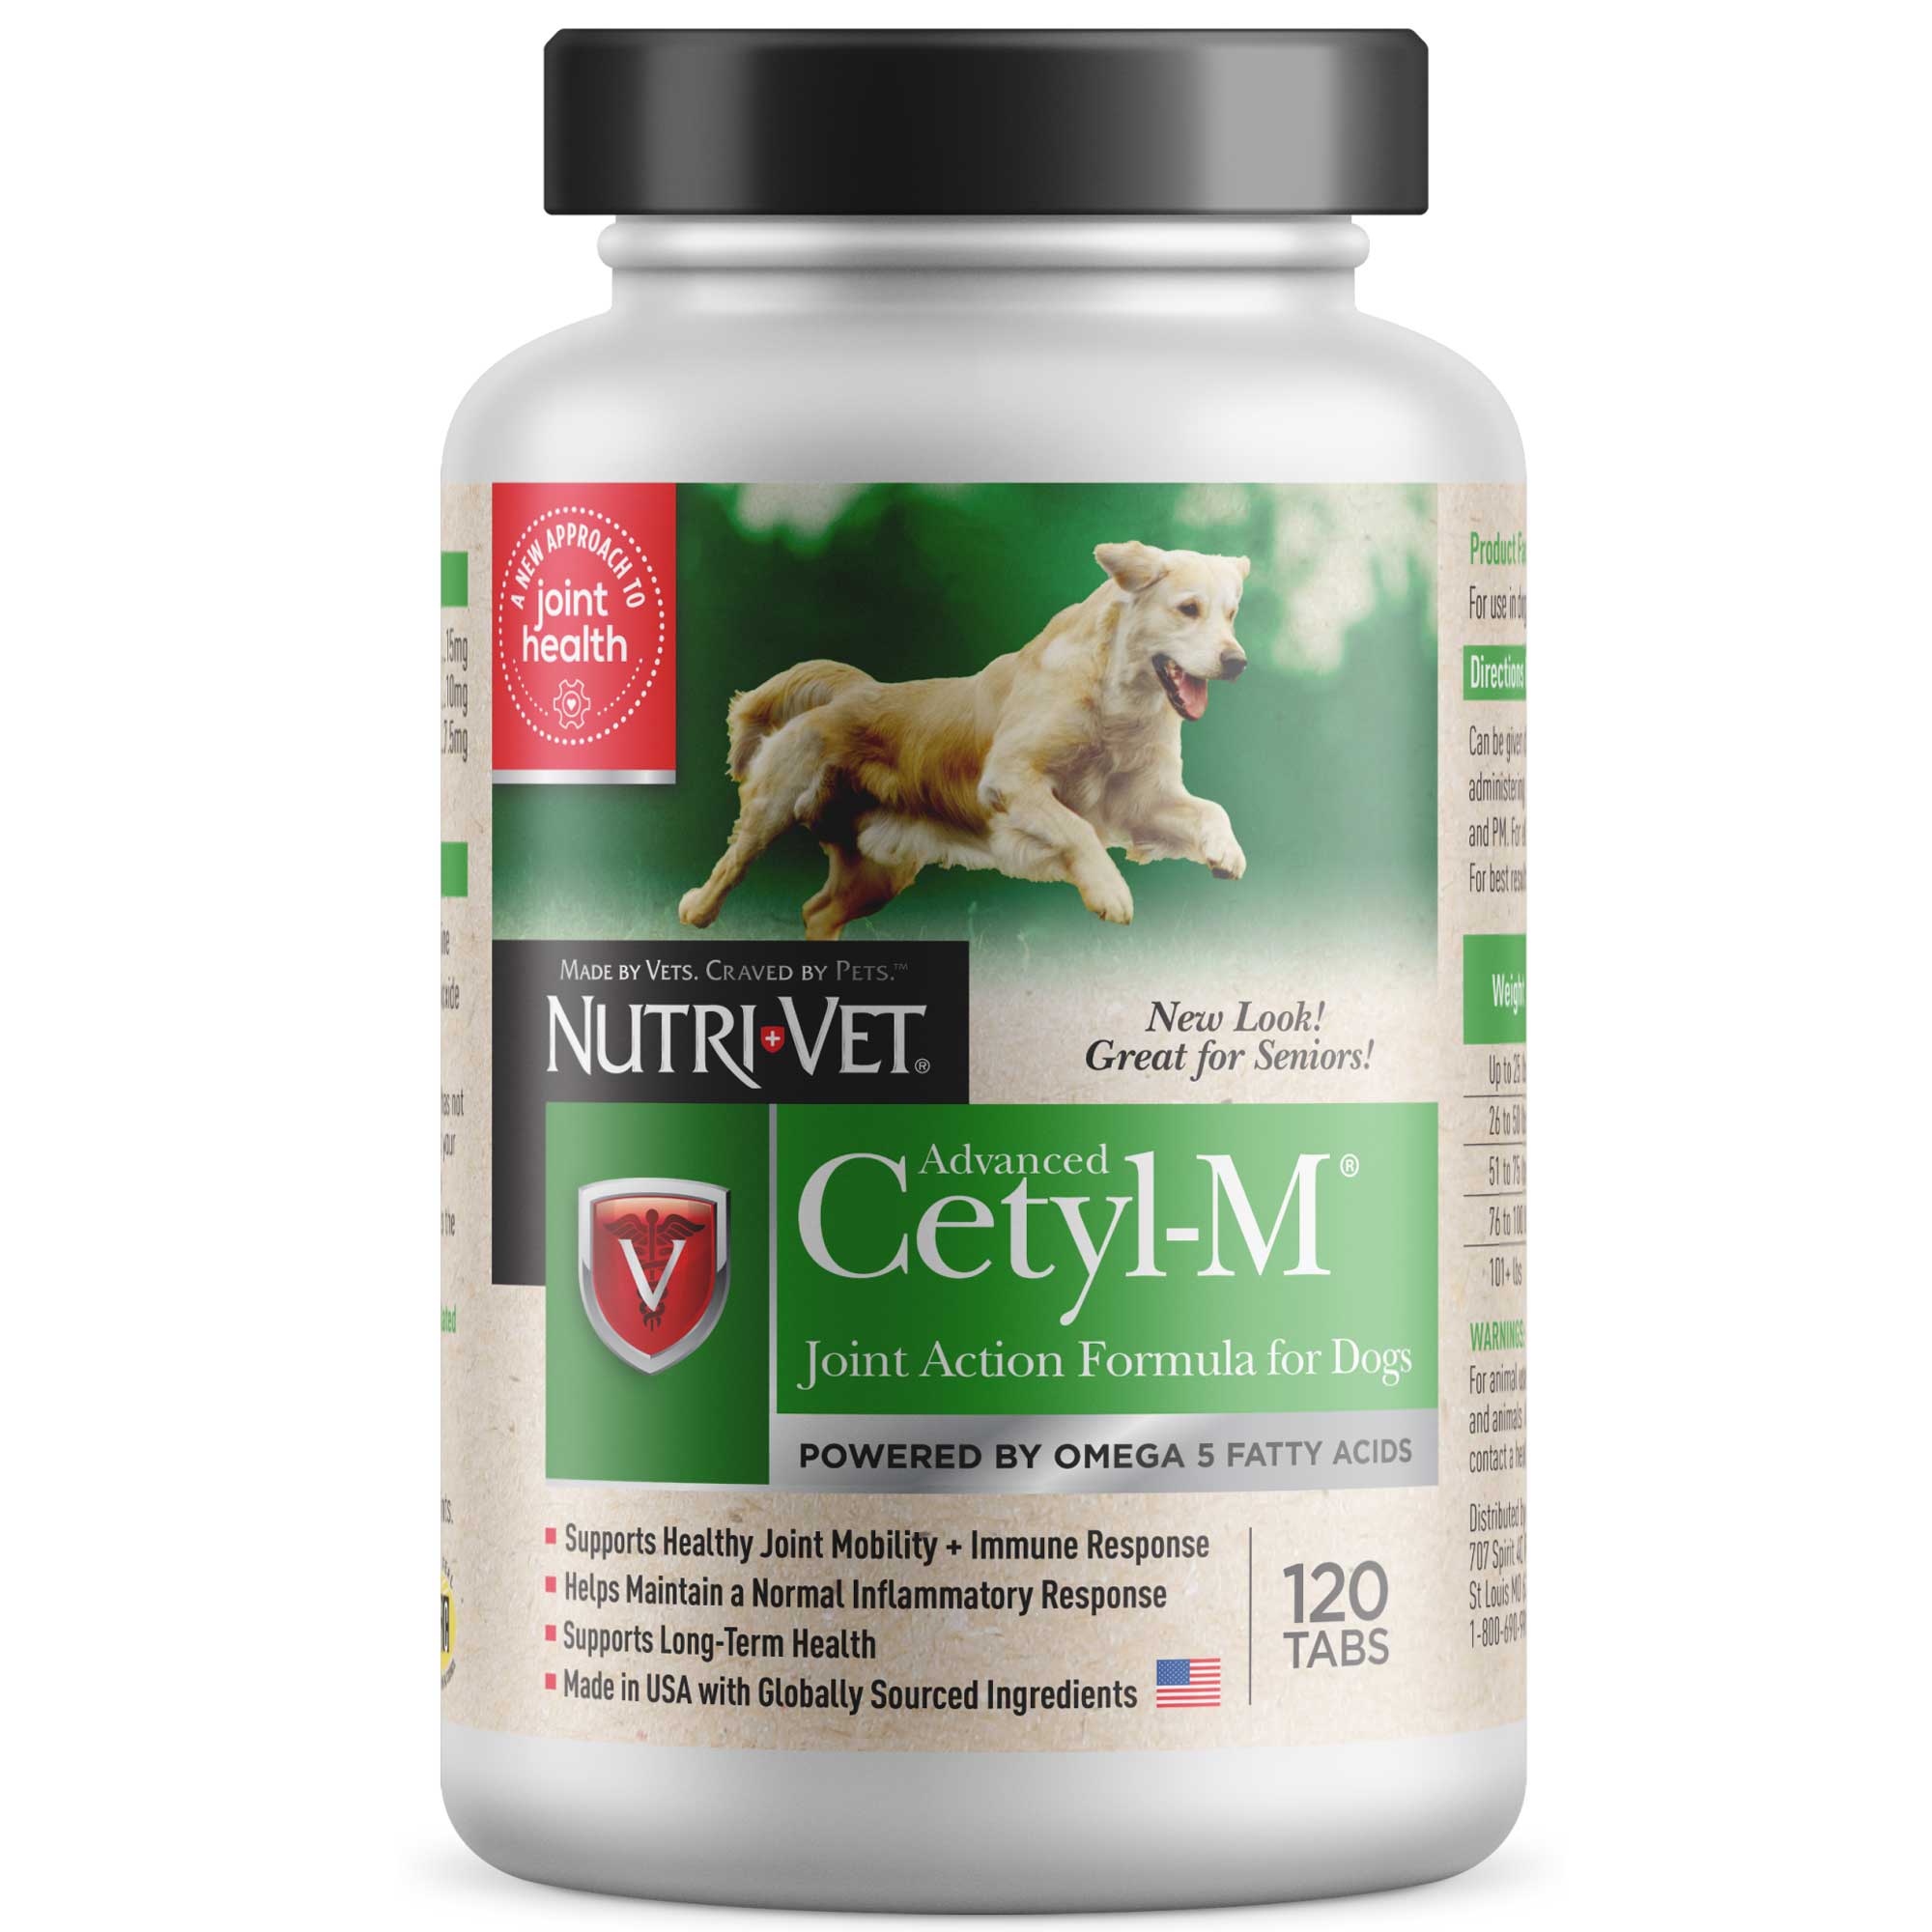 Advanced Cetyl-M Joint Action Formula Chewable Tablets Usage